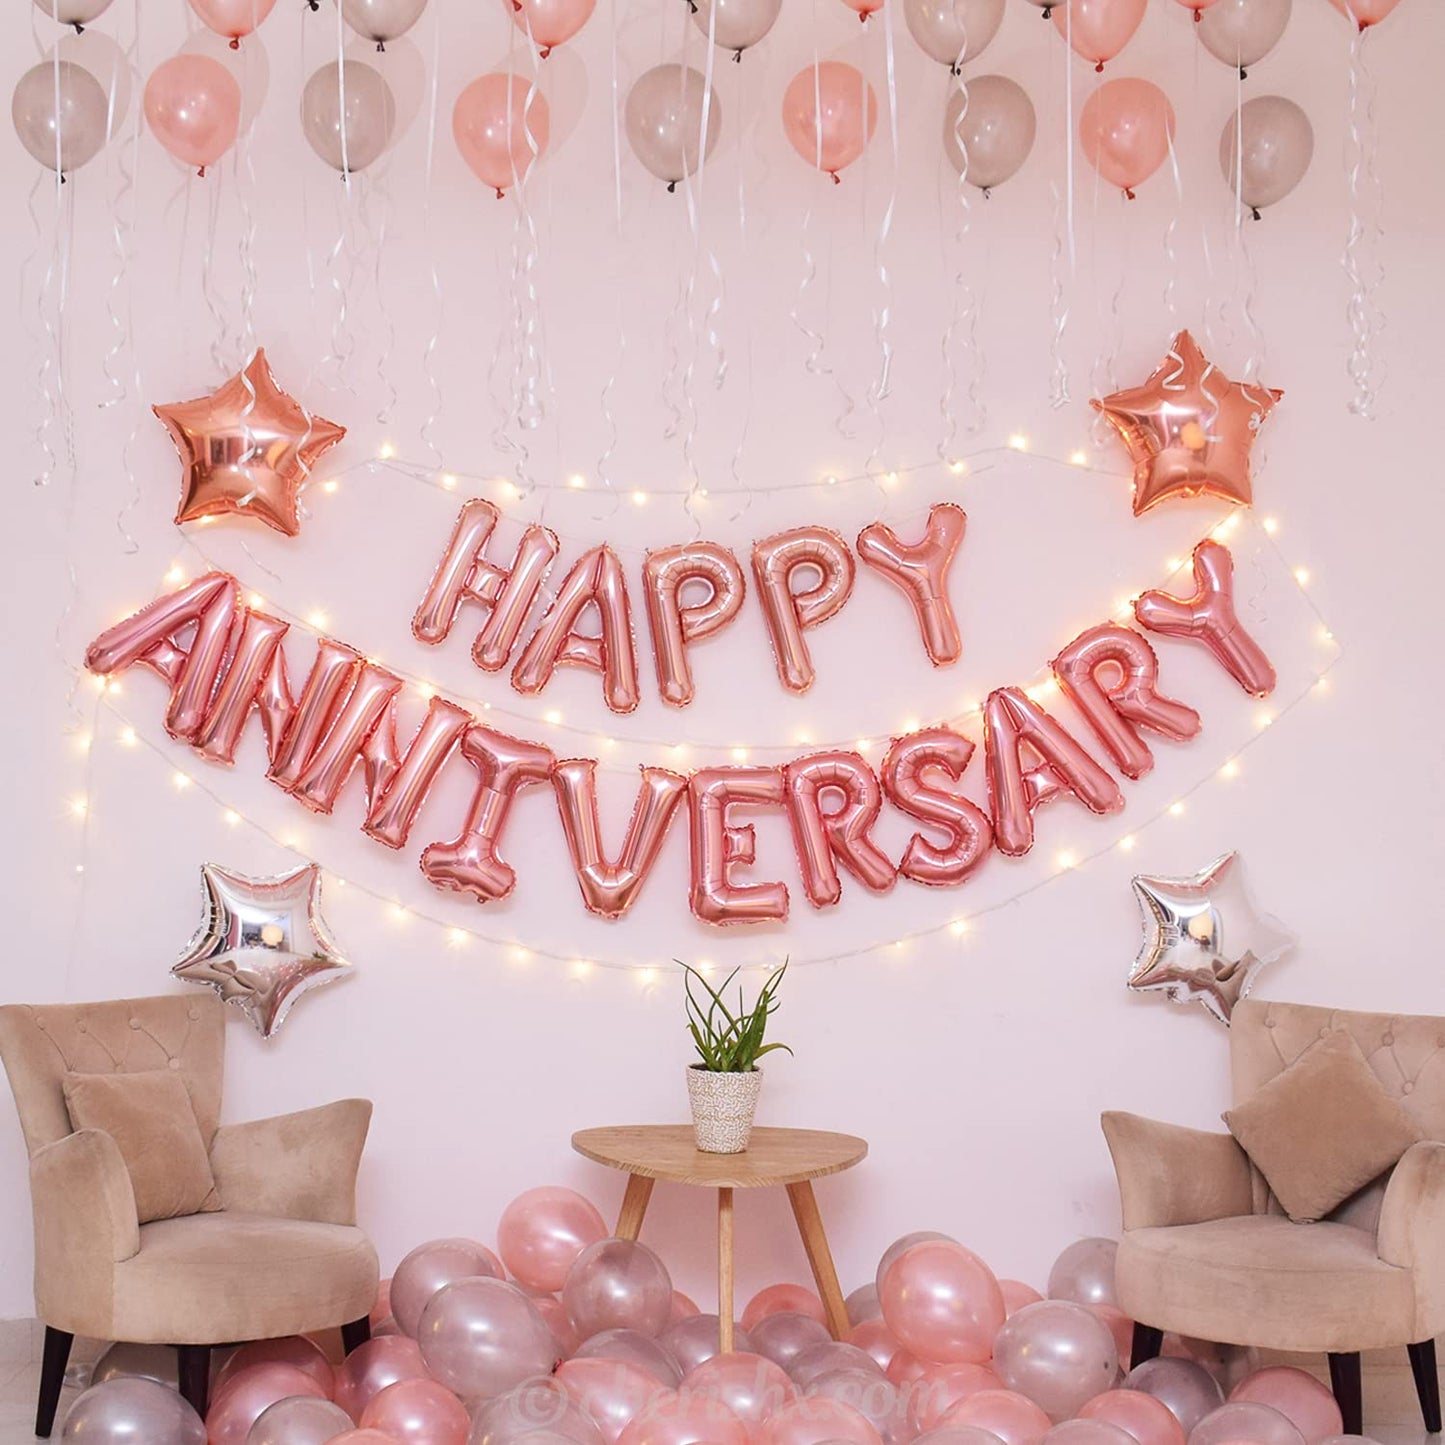 Anniversary Decorations For Home Set - Pack of 42 Pcs - Happy Anniversary Foil, Fairy Light, Star Shape Foil & Metallic Balloons - Happy Anniversary Decoration - CherishX Partystore